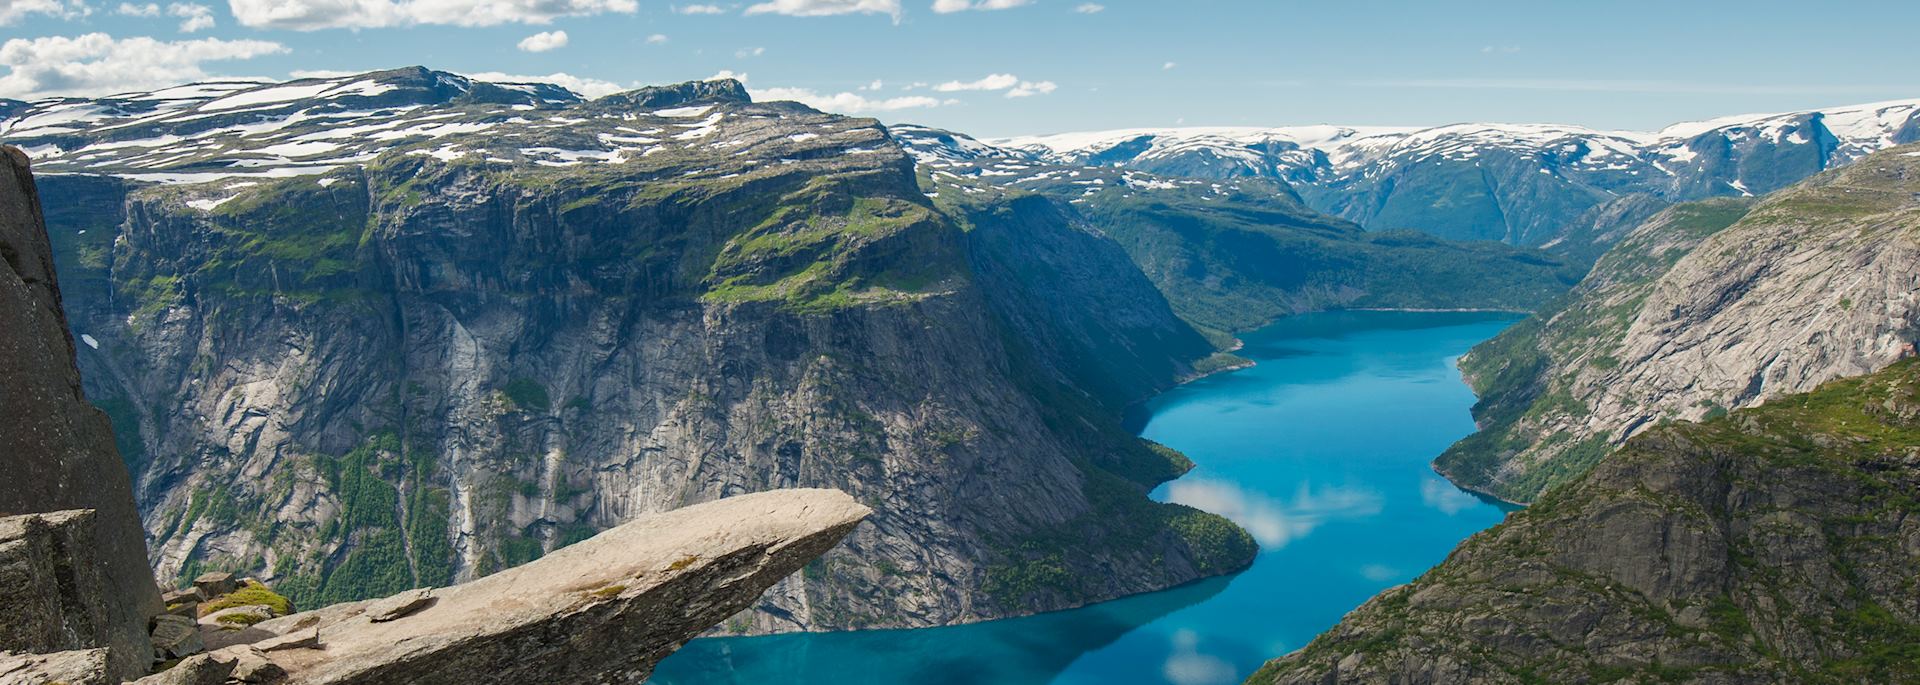 The rock formation of Trolltunga above lake Ringedalsvatnet